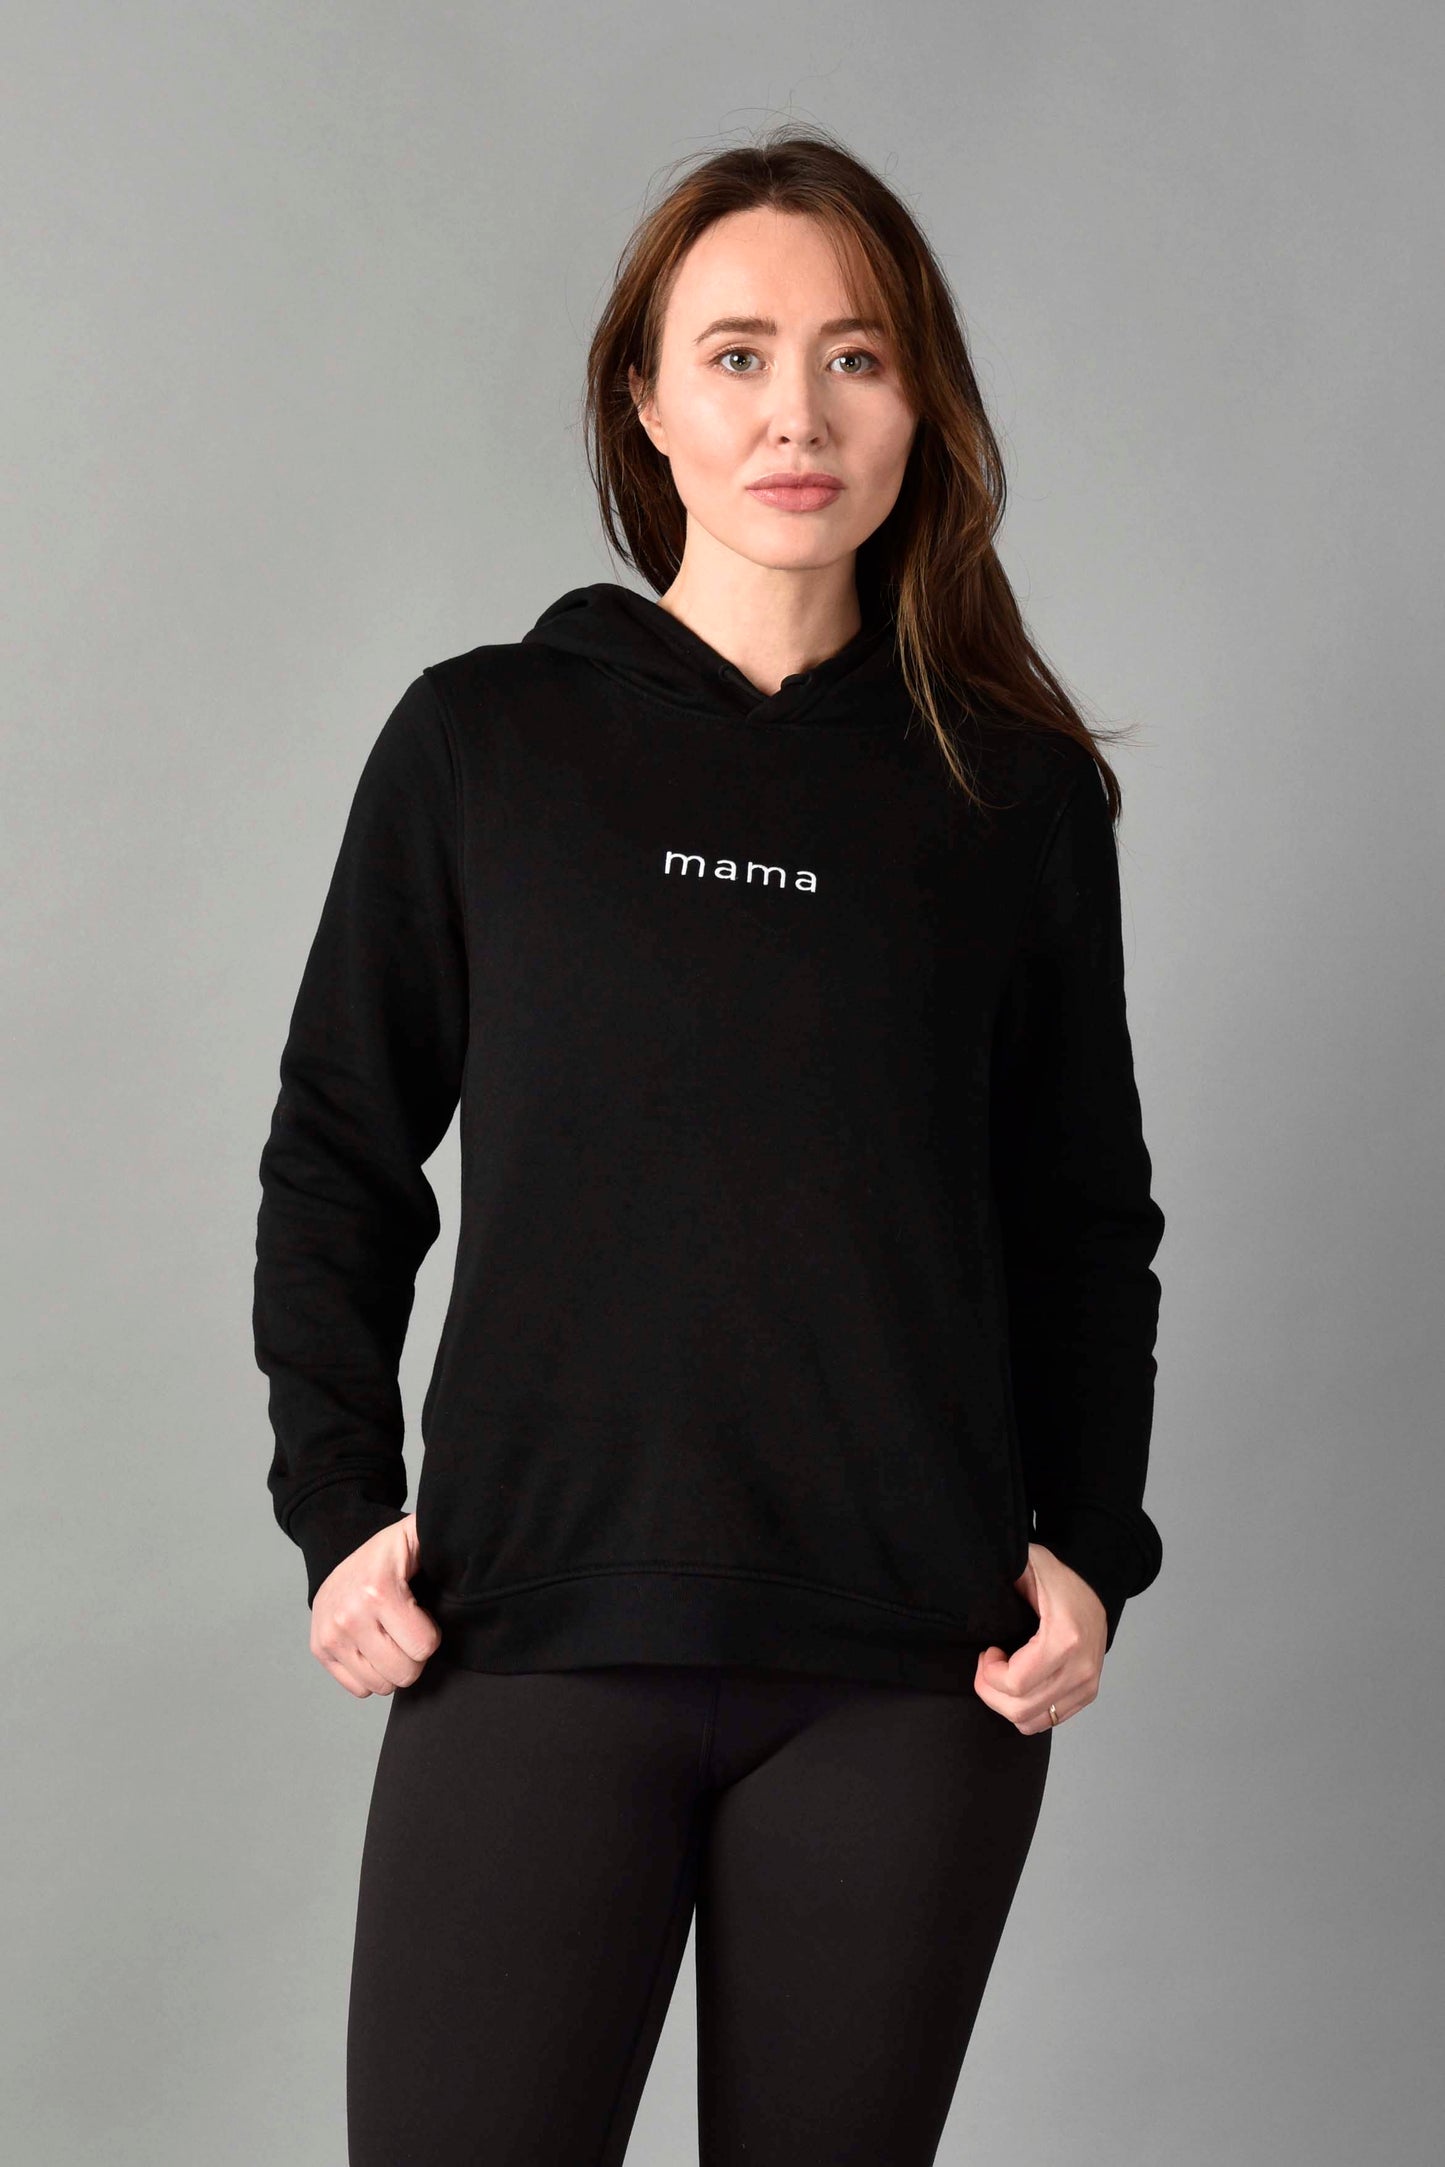 WEAR LOVE MORE Mama Sweatshirt.  Mama Hoodie in Organic Cotton.  Organic Cotton Sweatshirt with Embroidered Mama.  Family Match Hoodie Style in Black with White Embroidered Mama.